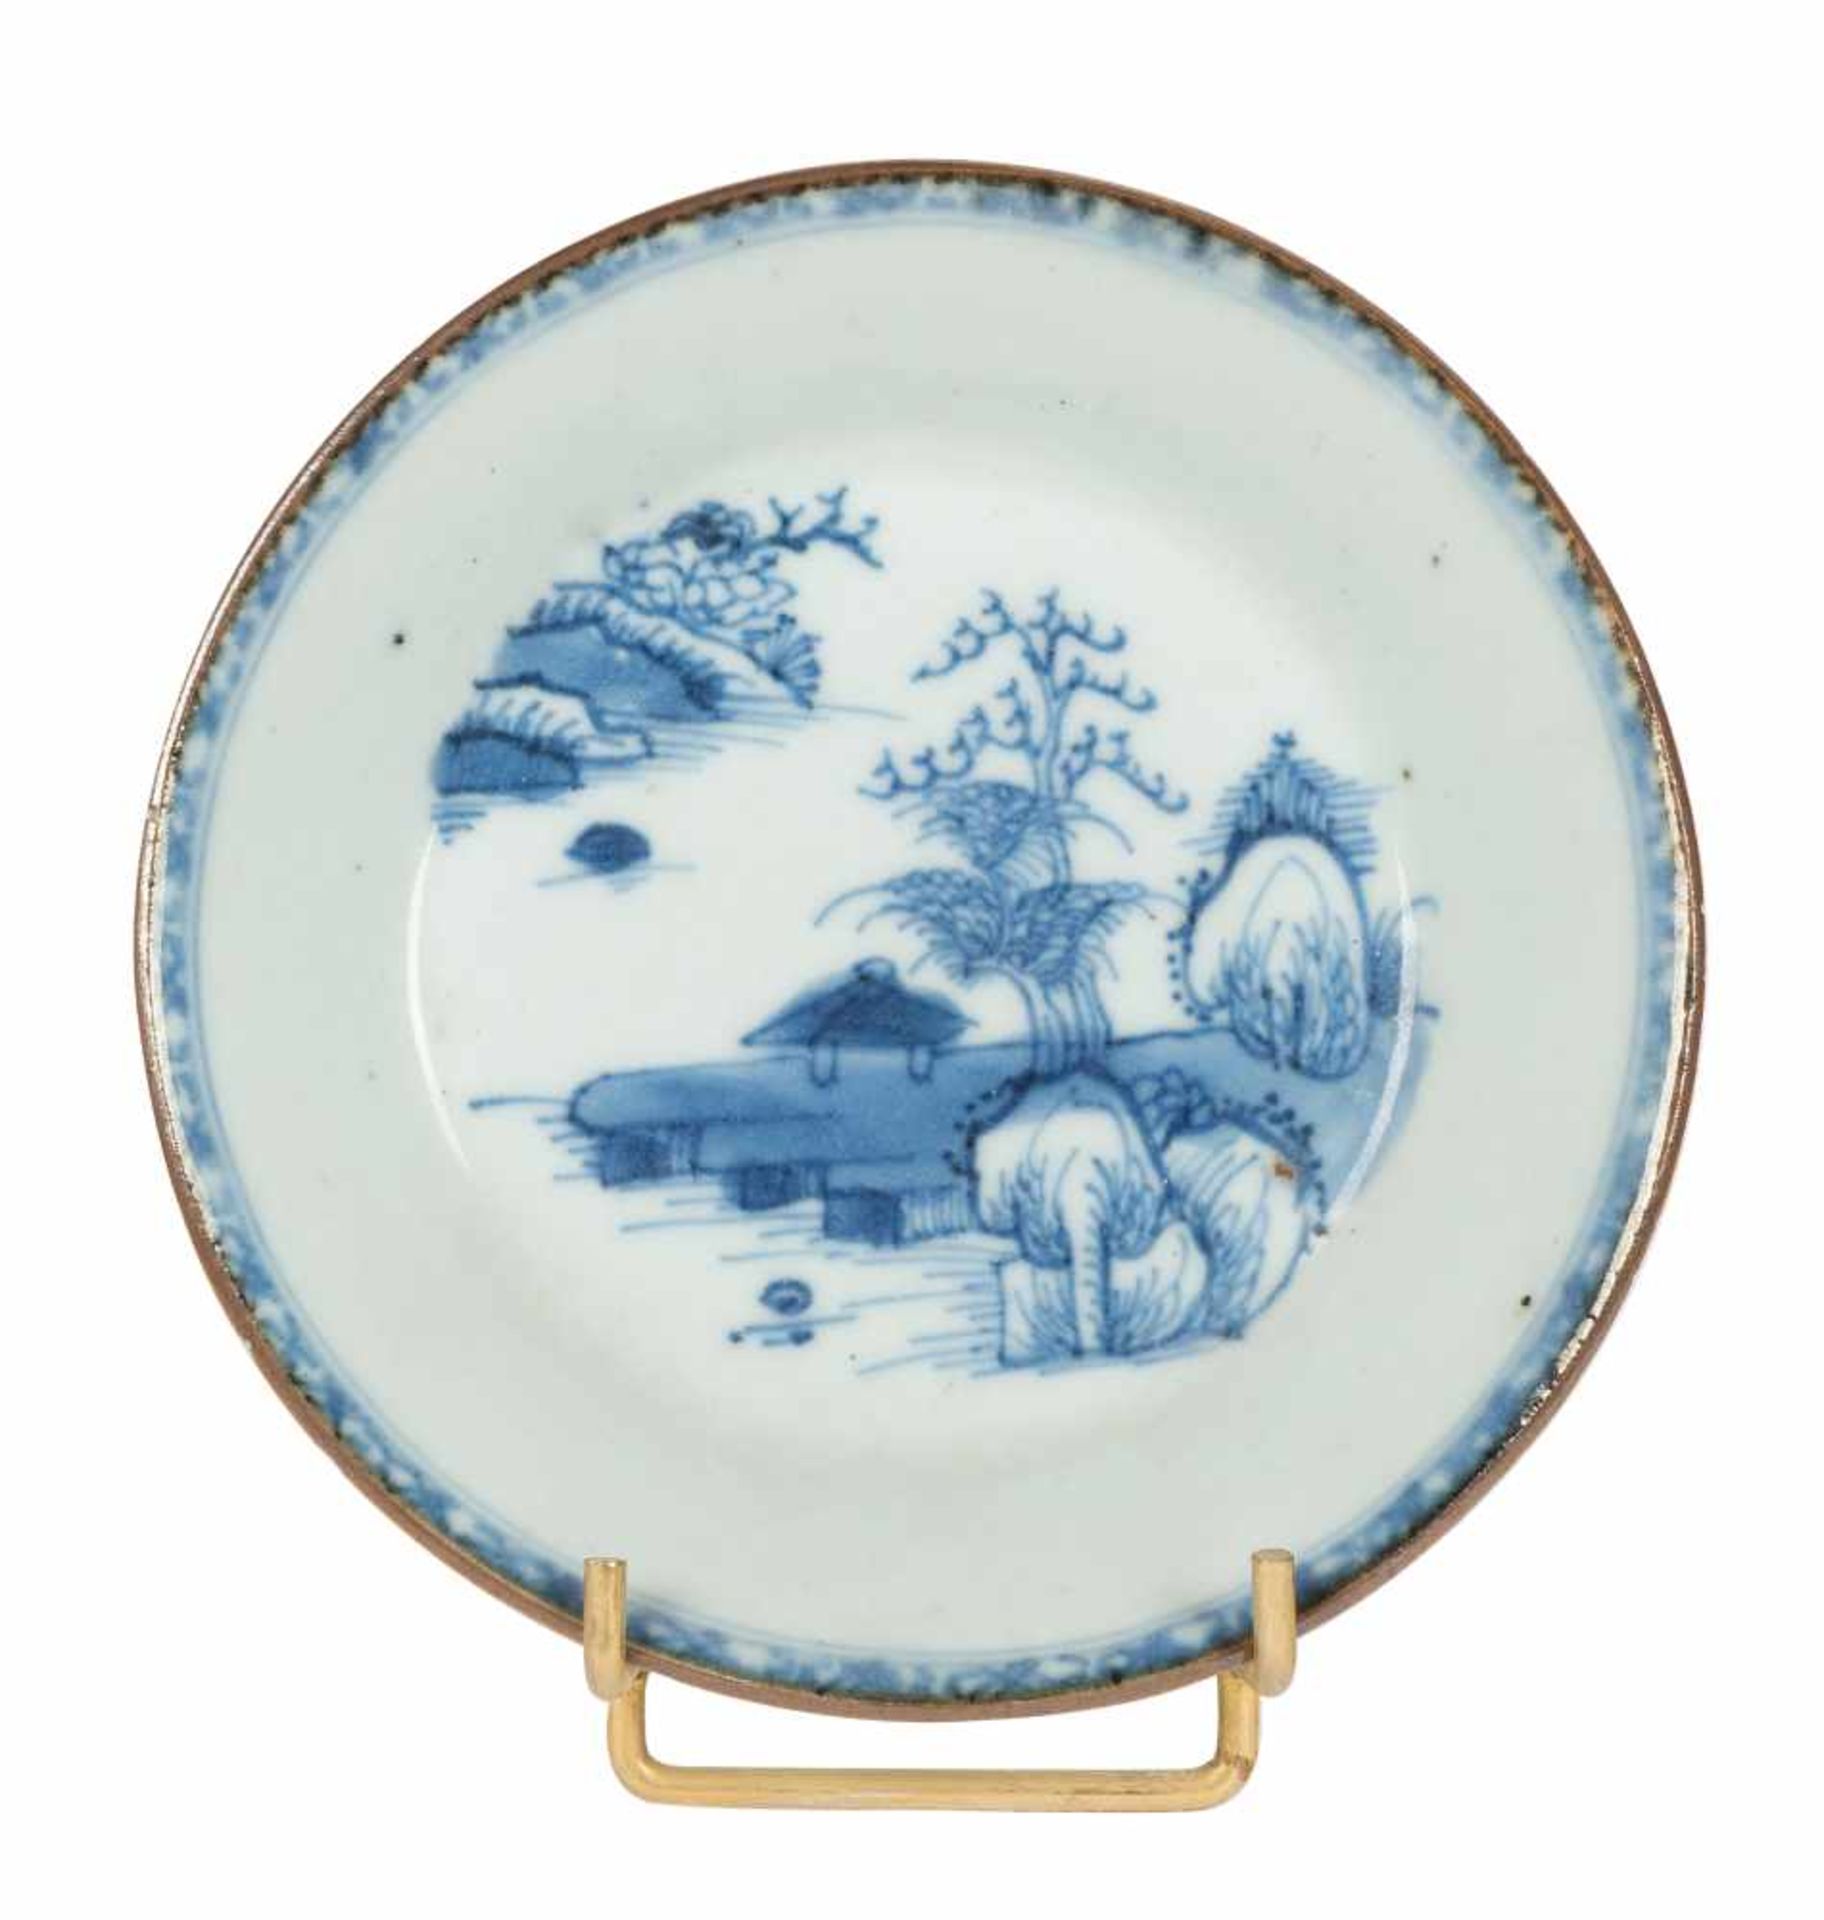 An saucer dish in blue and white porcelain depicting a central scene with a landscape. China. Qing